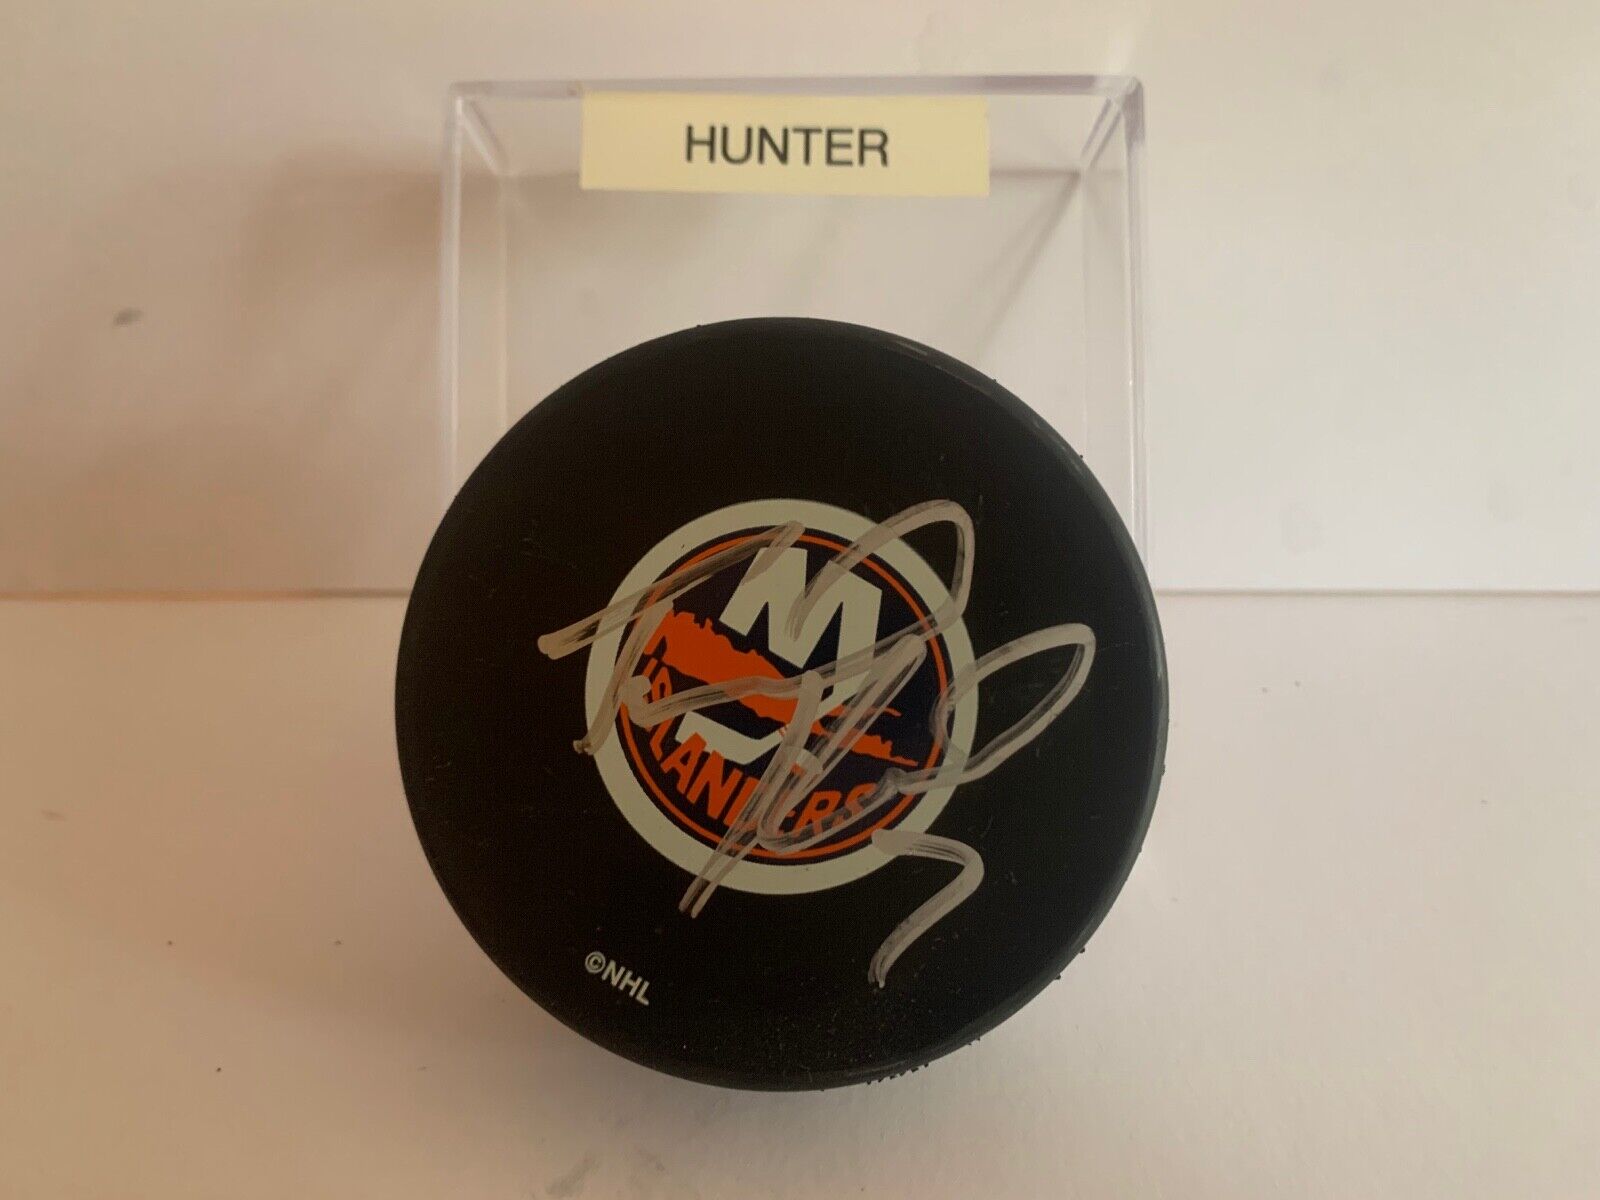 Trent Hunter Autographed Official NHL Hockey Puck New York Rangers Logo